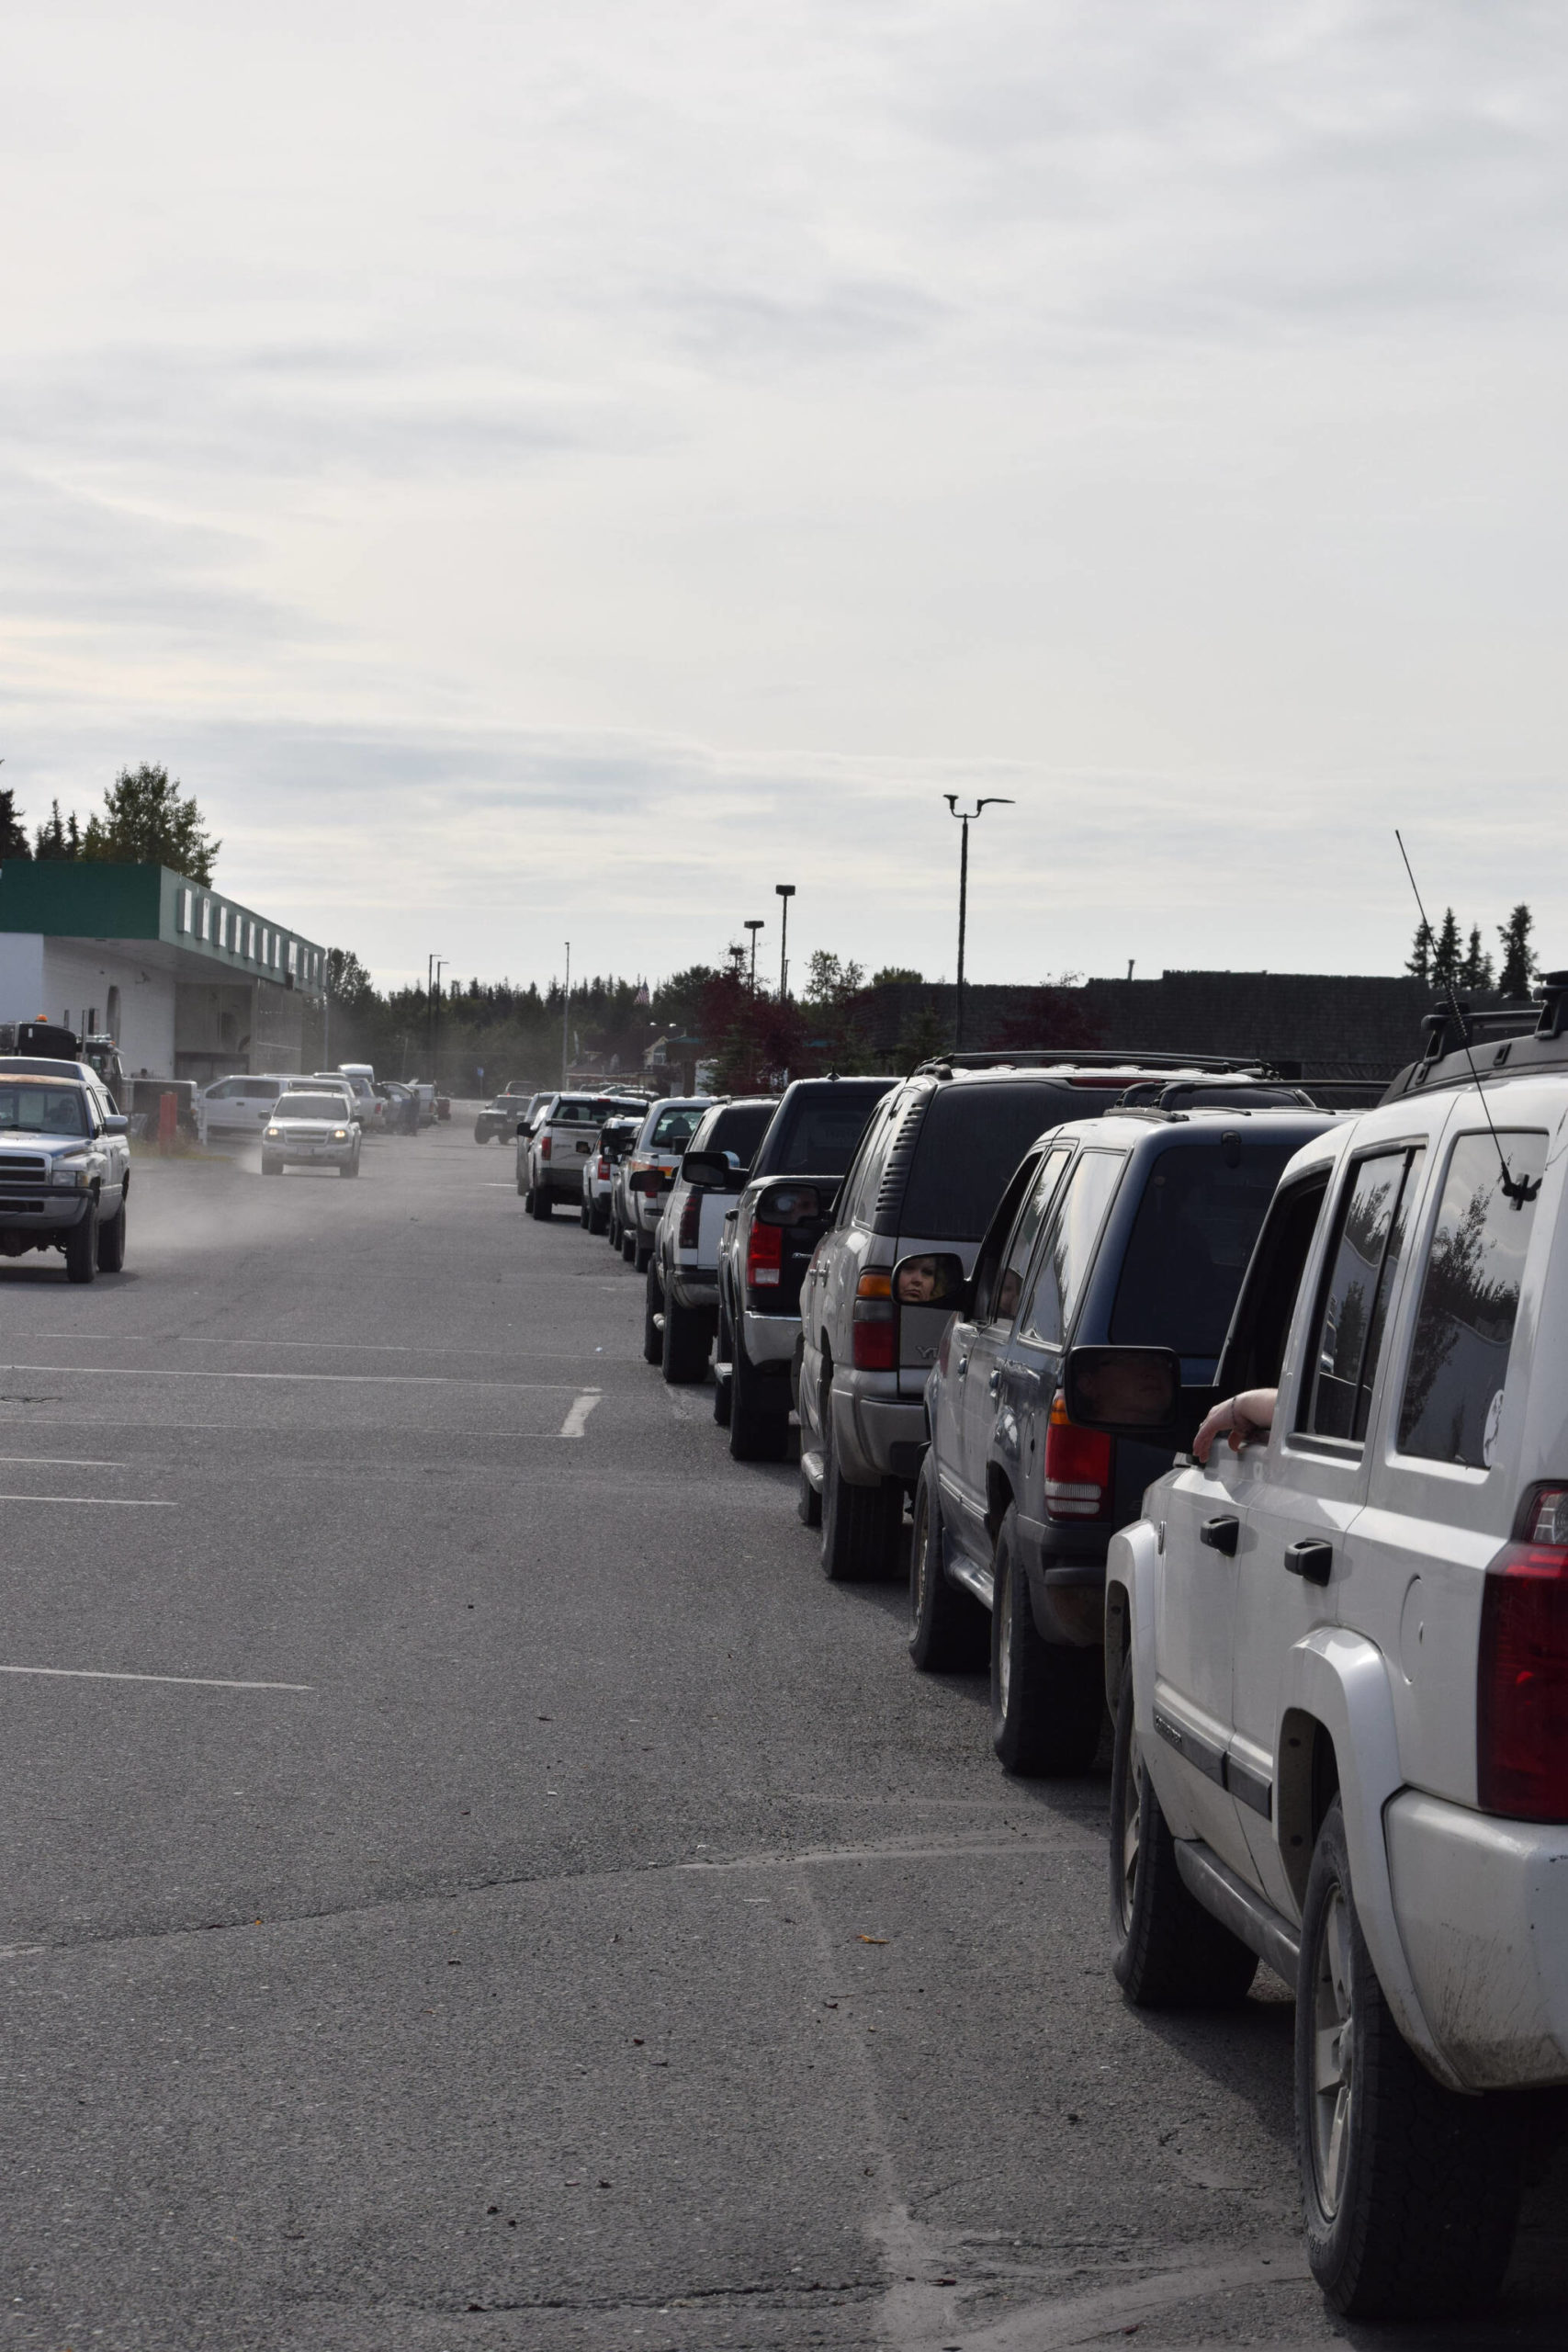 Cars line up outside of Capstone Clinic’s COVID-19 testing site in Kenai, Alaska on Tuesday, Sept. 7, 2021. The line extended through the Three Bears Grocery parking lot, and past the entrances to O’Reilly Auto Parts and Aspen Extended Stay Suites. Some said they waited for three and a half hours to get tested, and others said the line stretched down and around Walker Lane Tuesday morning. (Camille Botello/Peninsula Clarion)